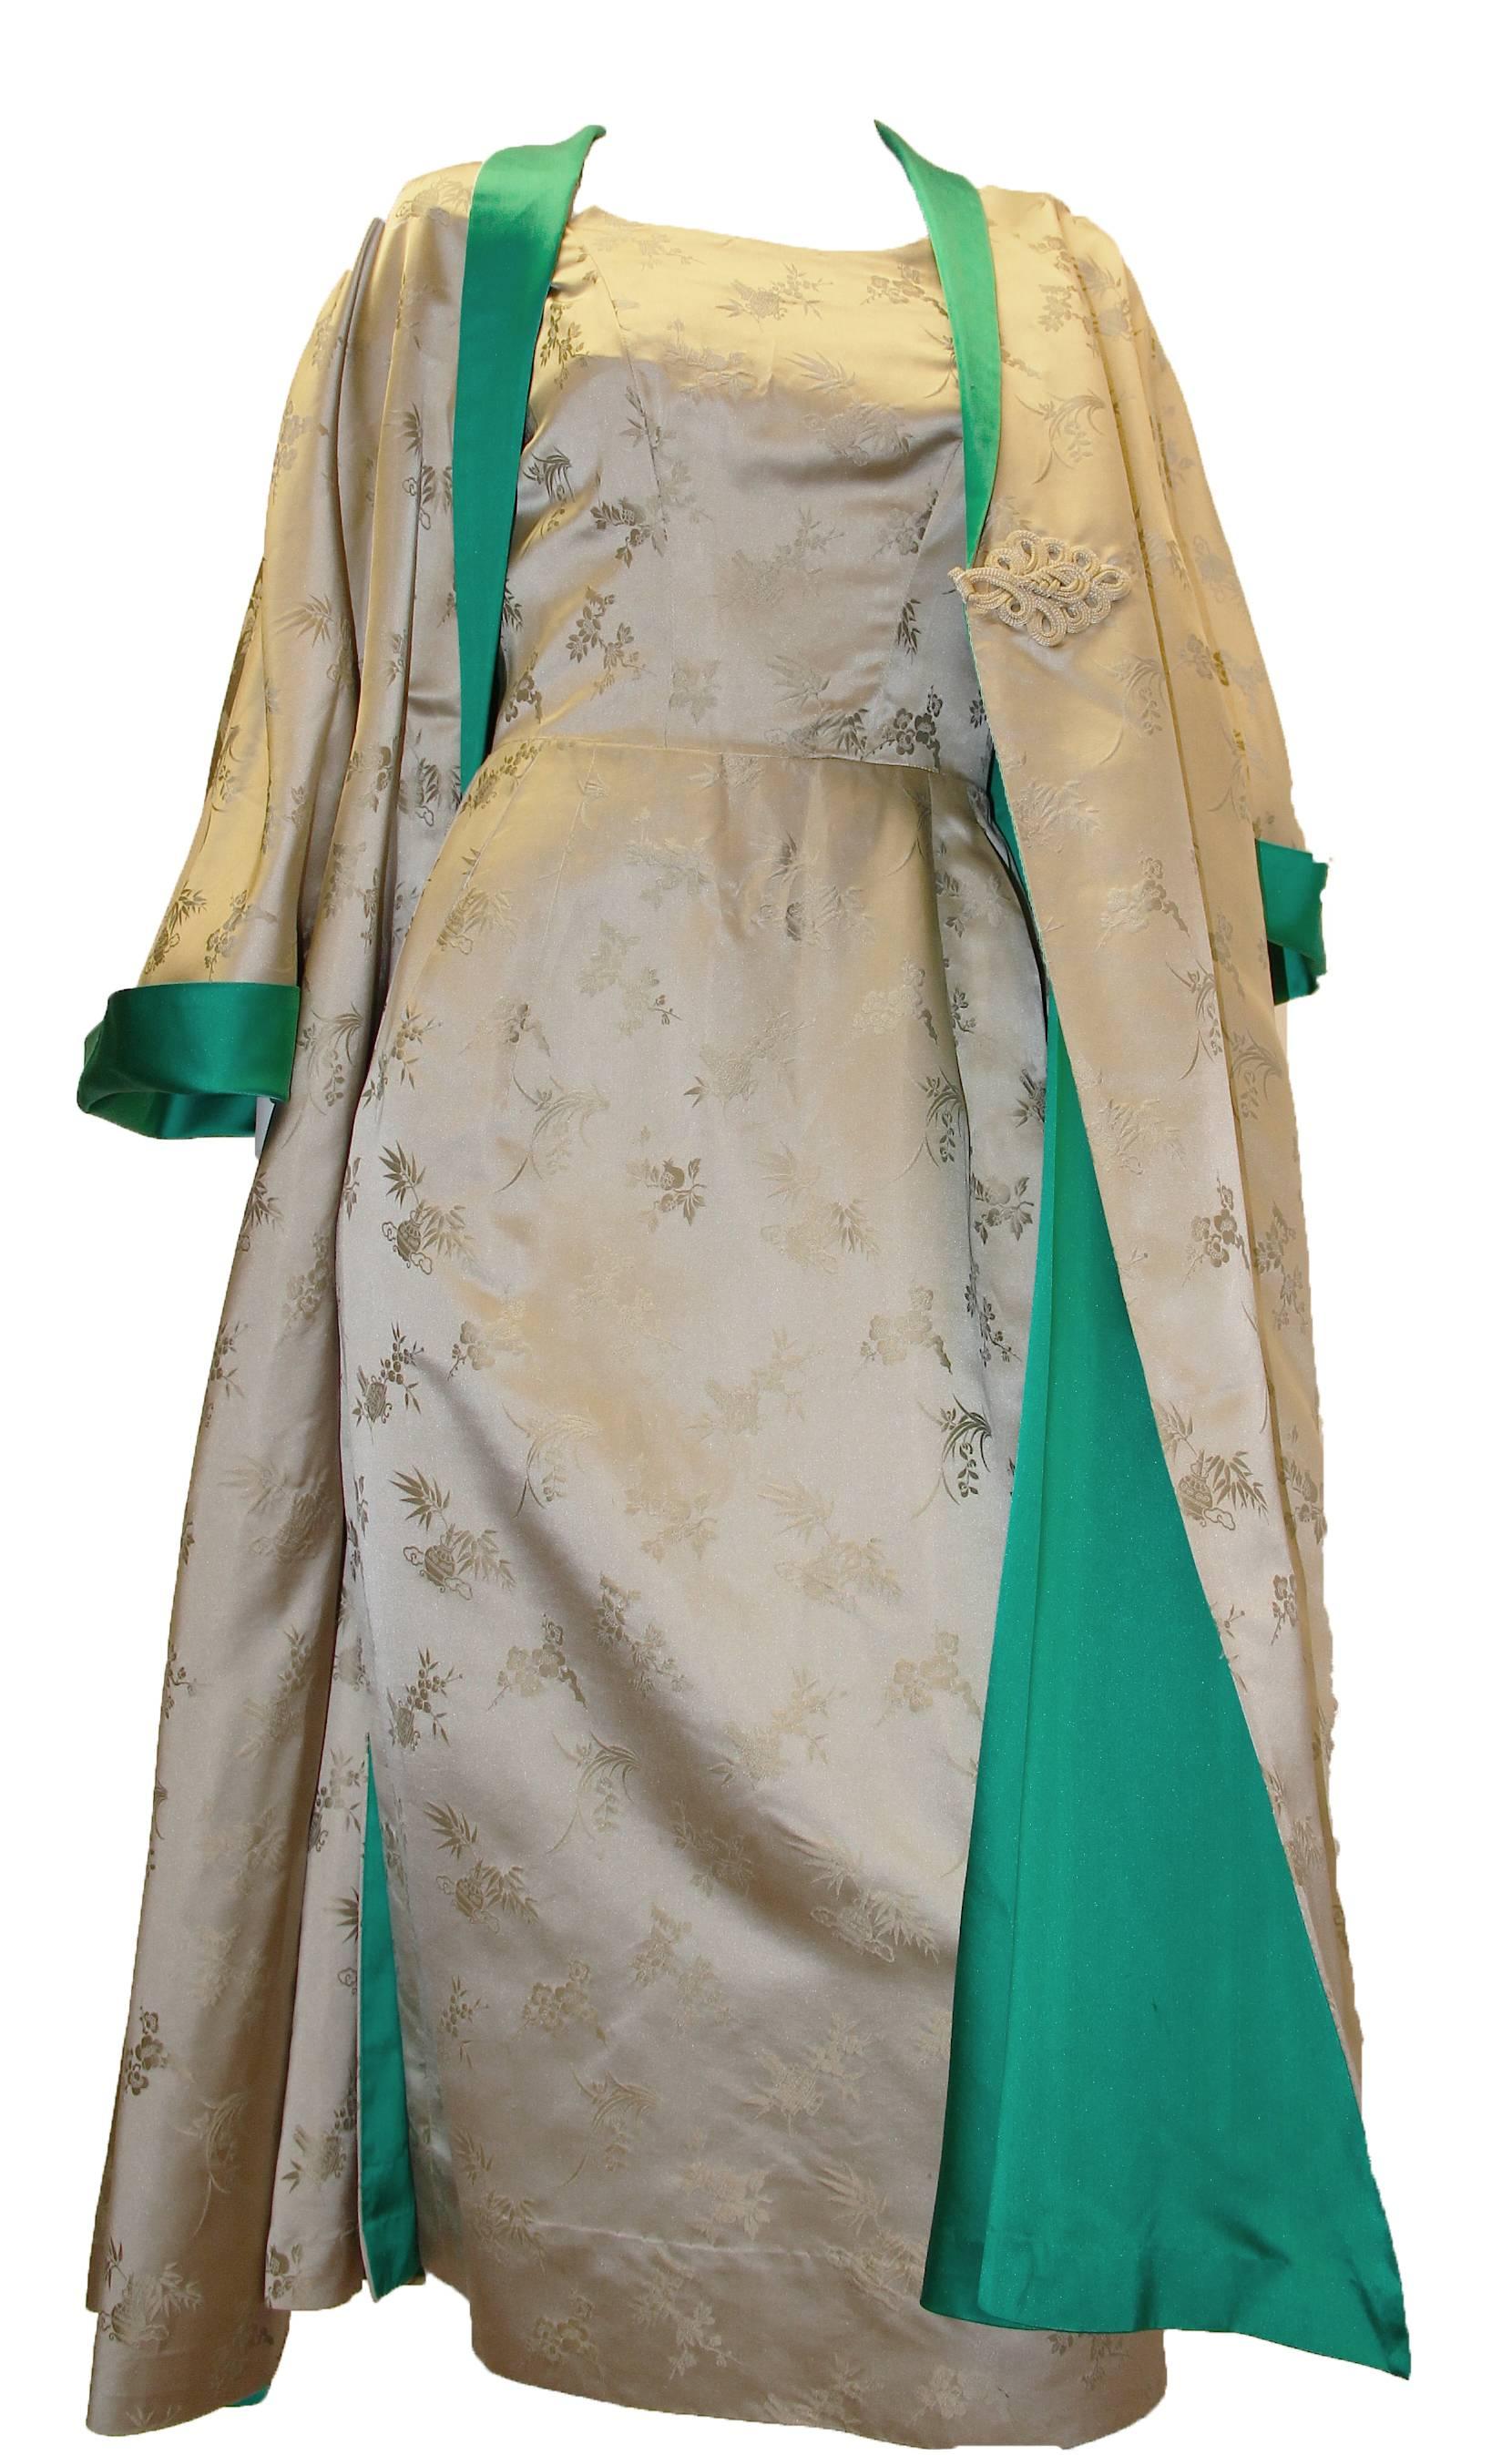 1950s silk two piece chinoiserie evening set. Swing coat and dress both have front pockets! Metal zipper closure on dress. Frog closure on jacket.  

Measurements:
Dress (fitted, silk fabric has no give) 
Bust: 32